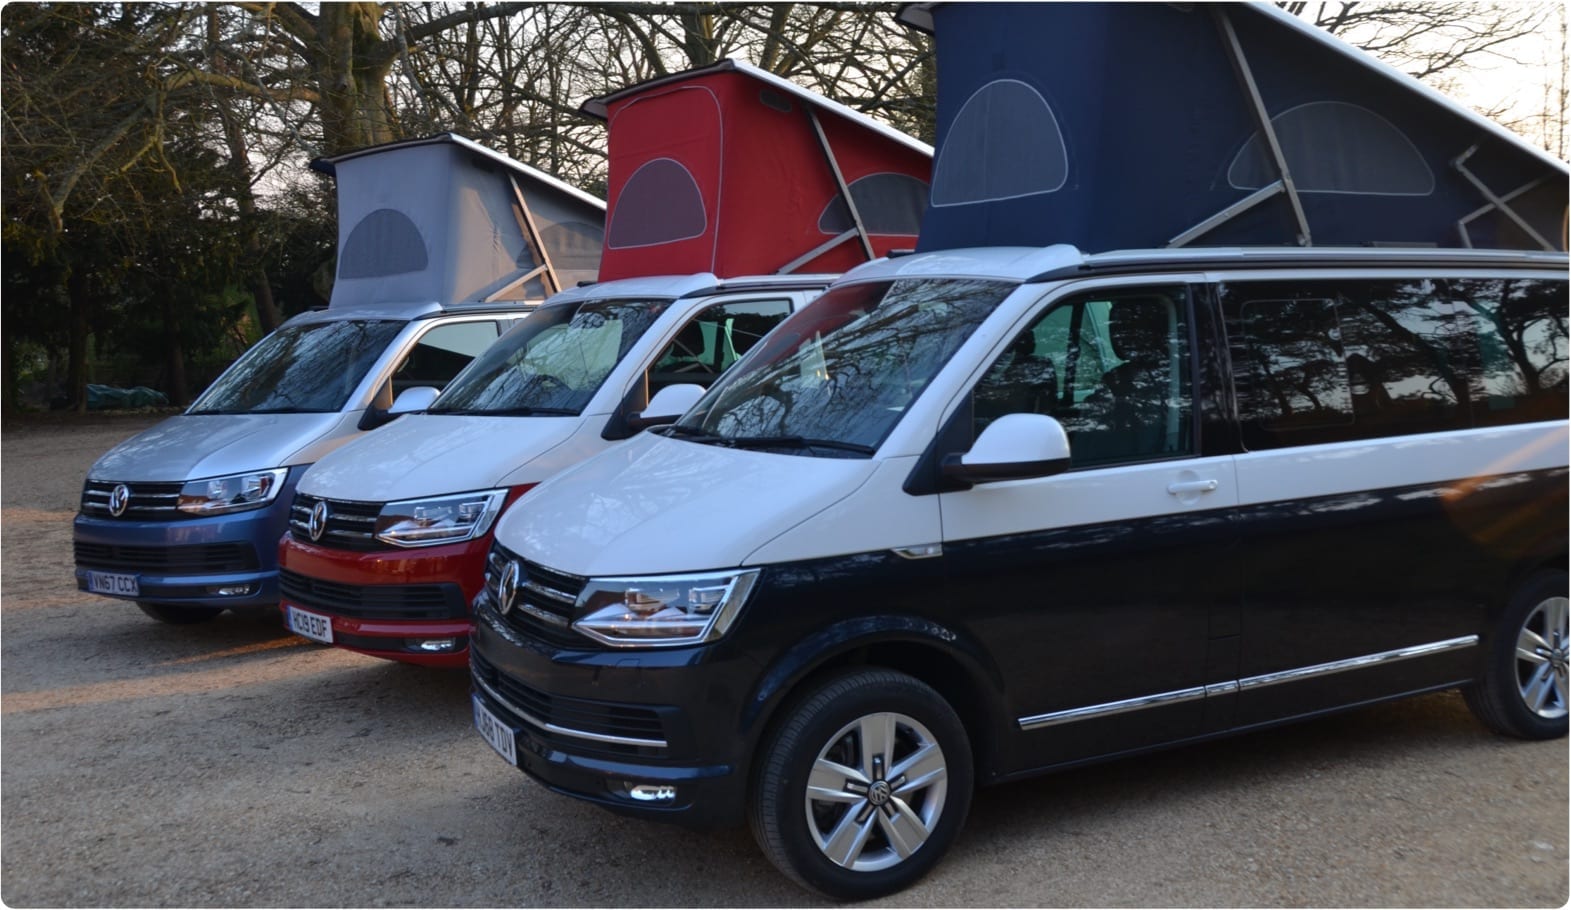 A photo with 3 different VW campervans which are available for hire from Southampton campers.